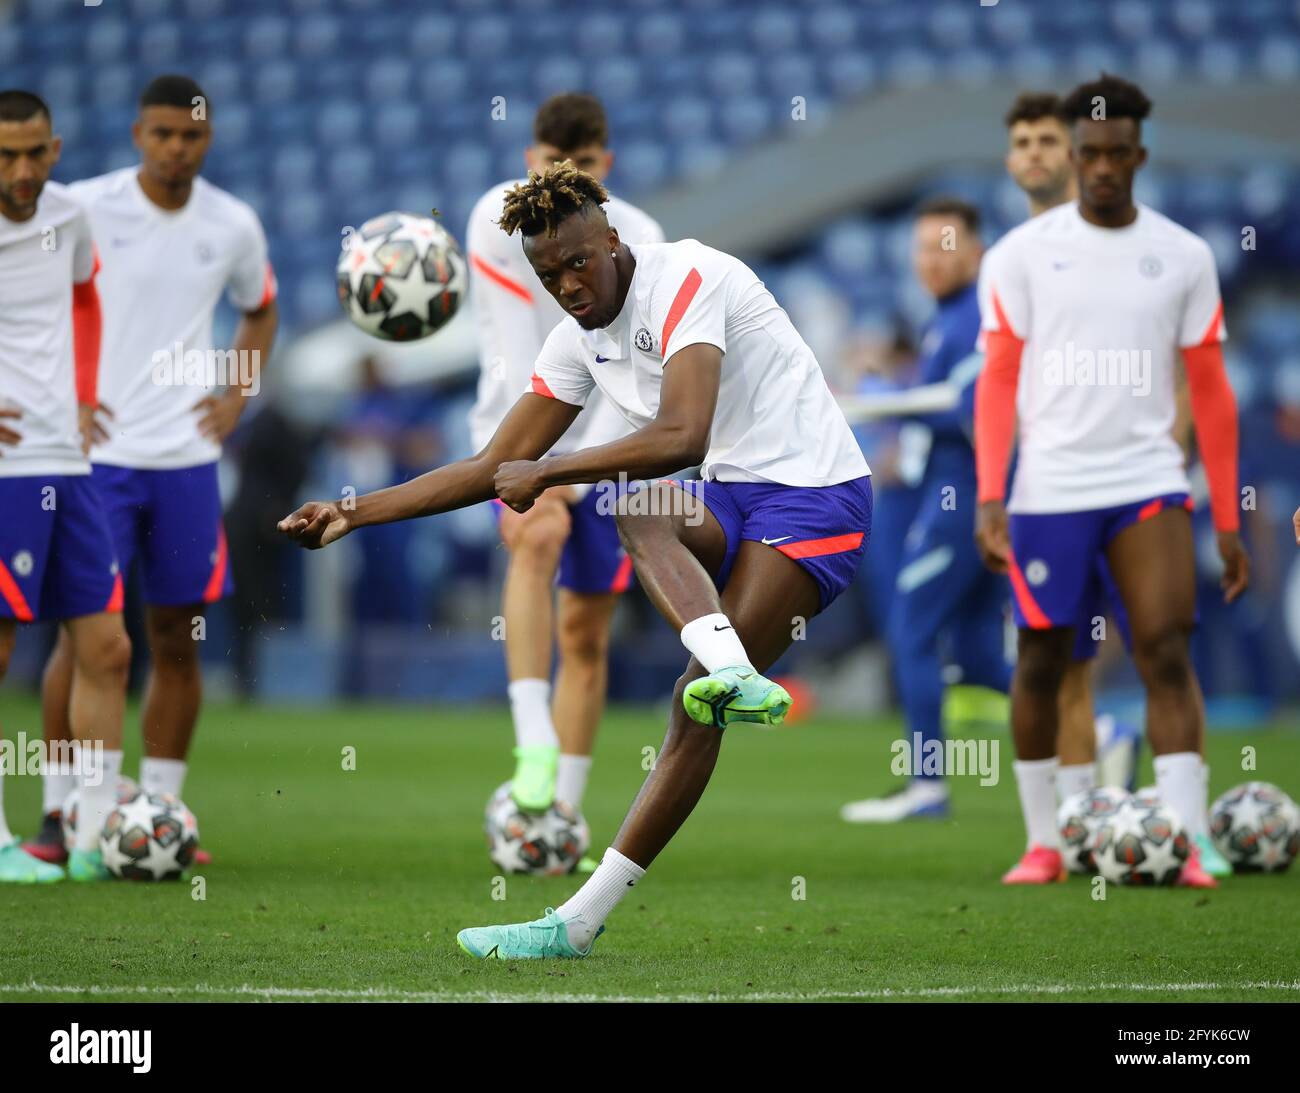 Porto, Portugal, 28th May 2021. Tammy Abraham of Chelsea shoots during a  training session at the